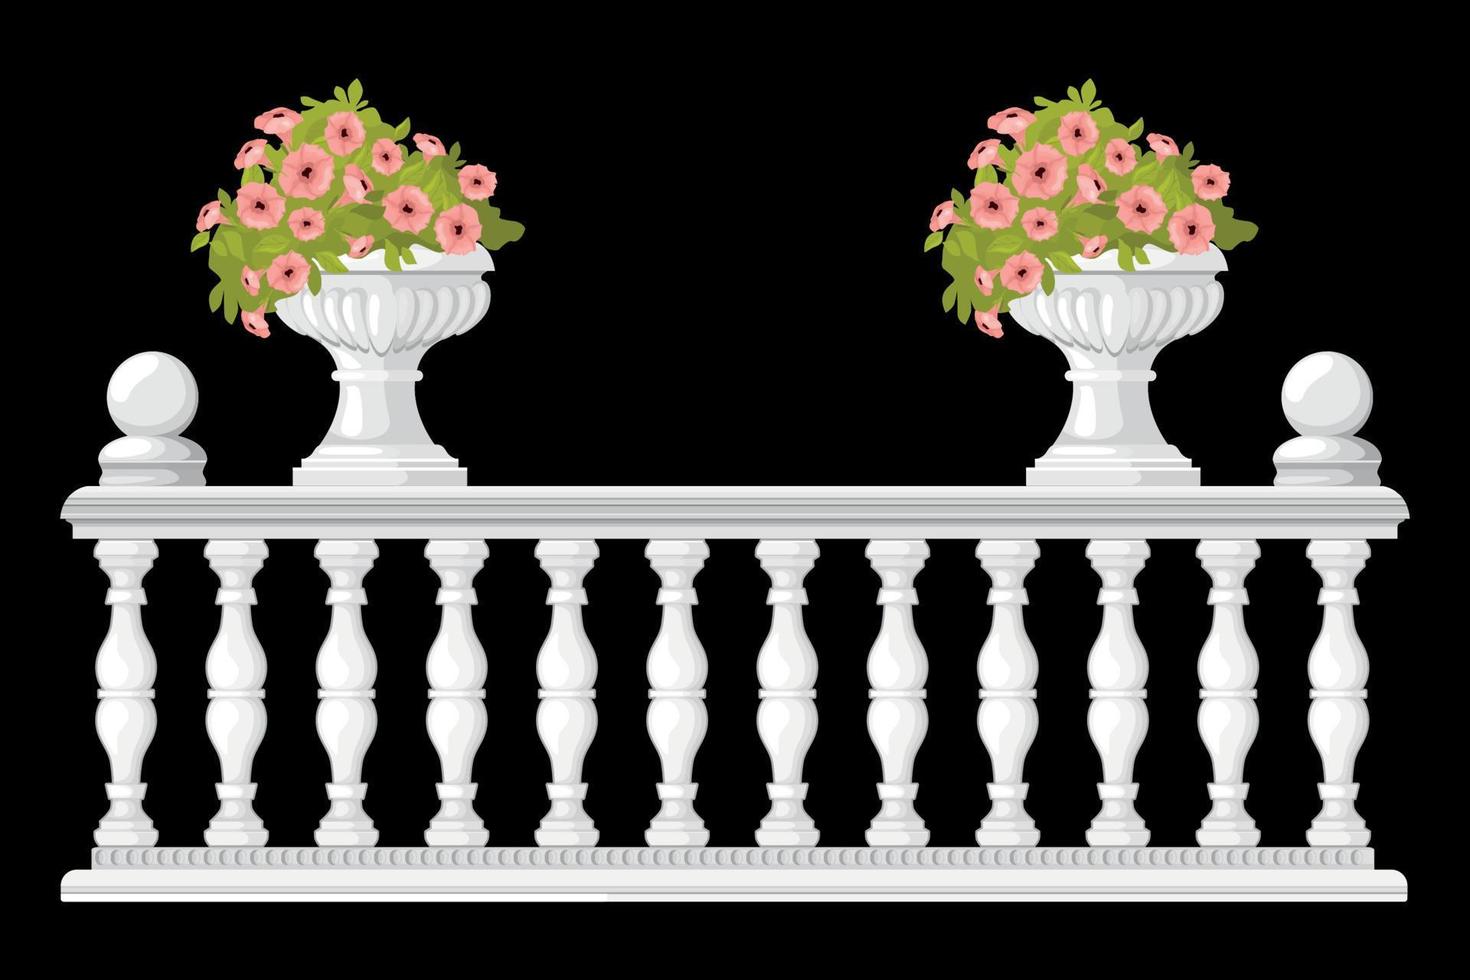 Balusters Vase Flowers Composition vector